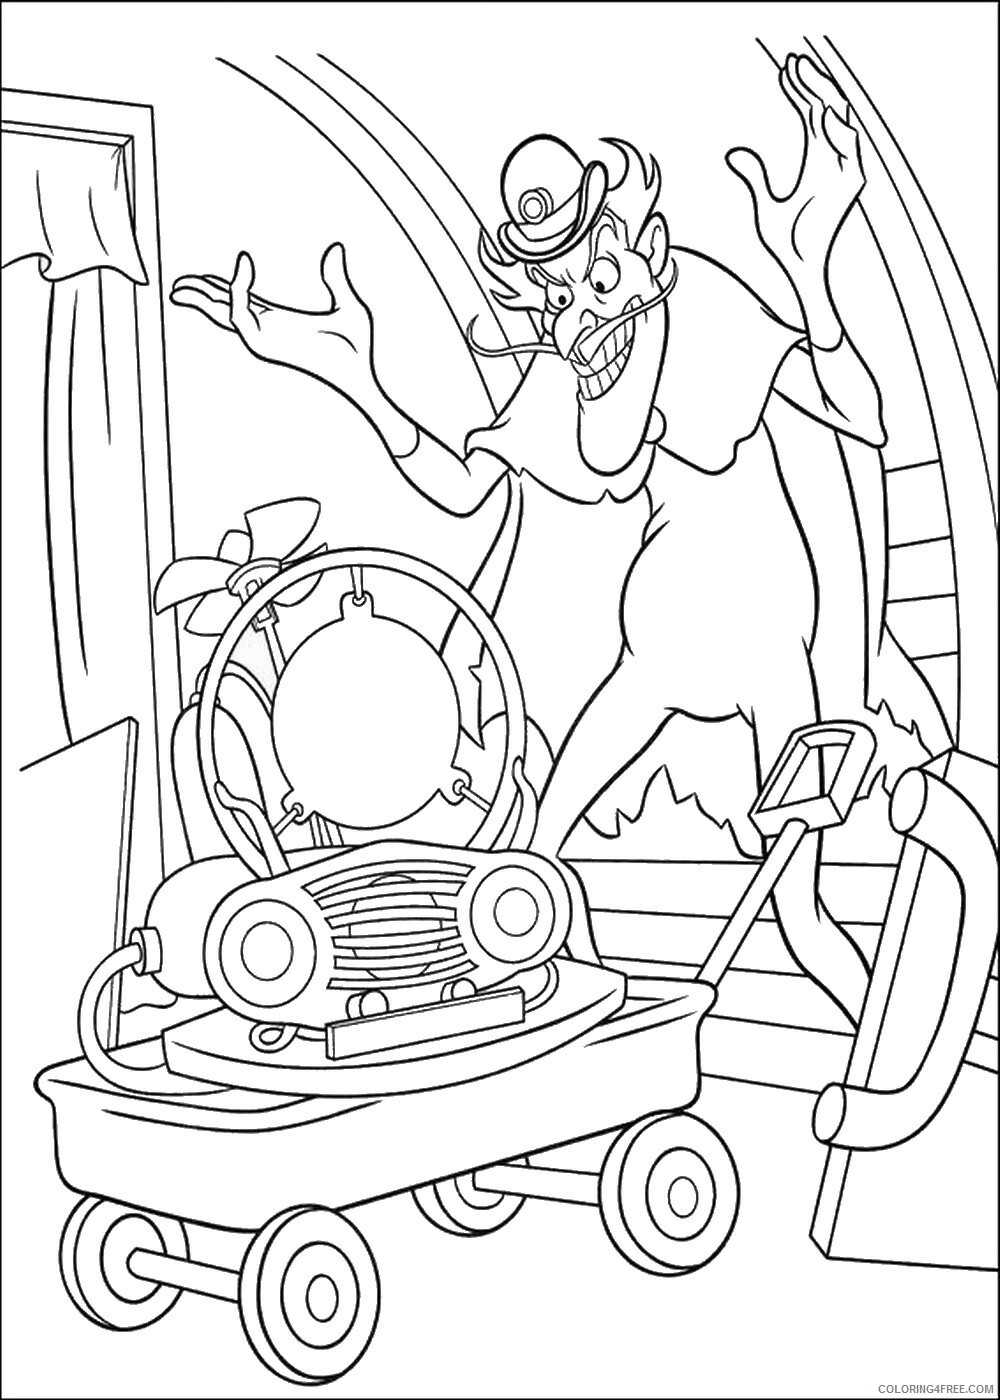 Meet the Robinsons Coloring Pages TV Film meet_the_robinsons Printable 2020 04950 Coloring4free